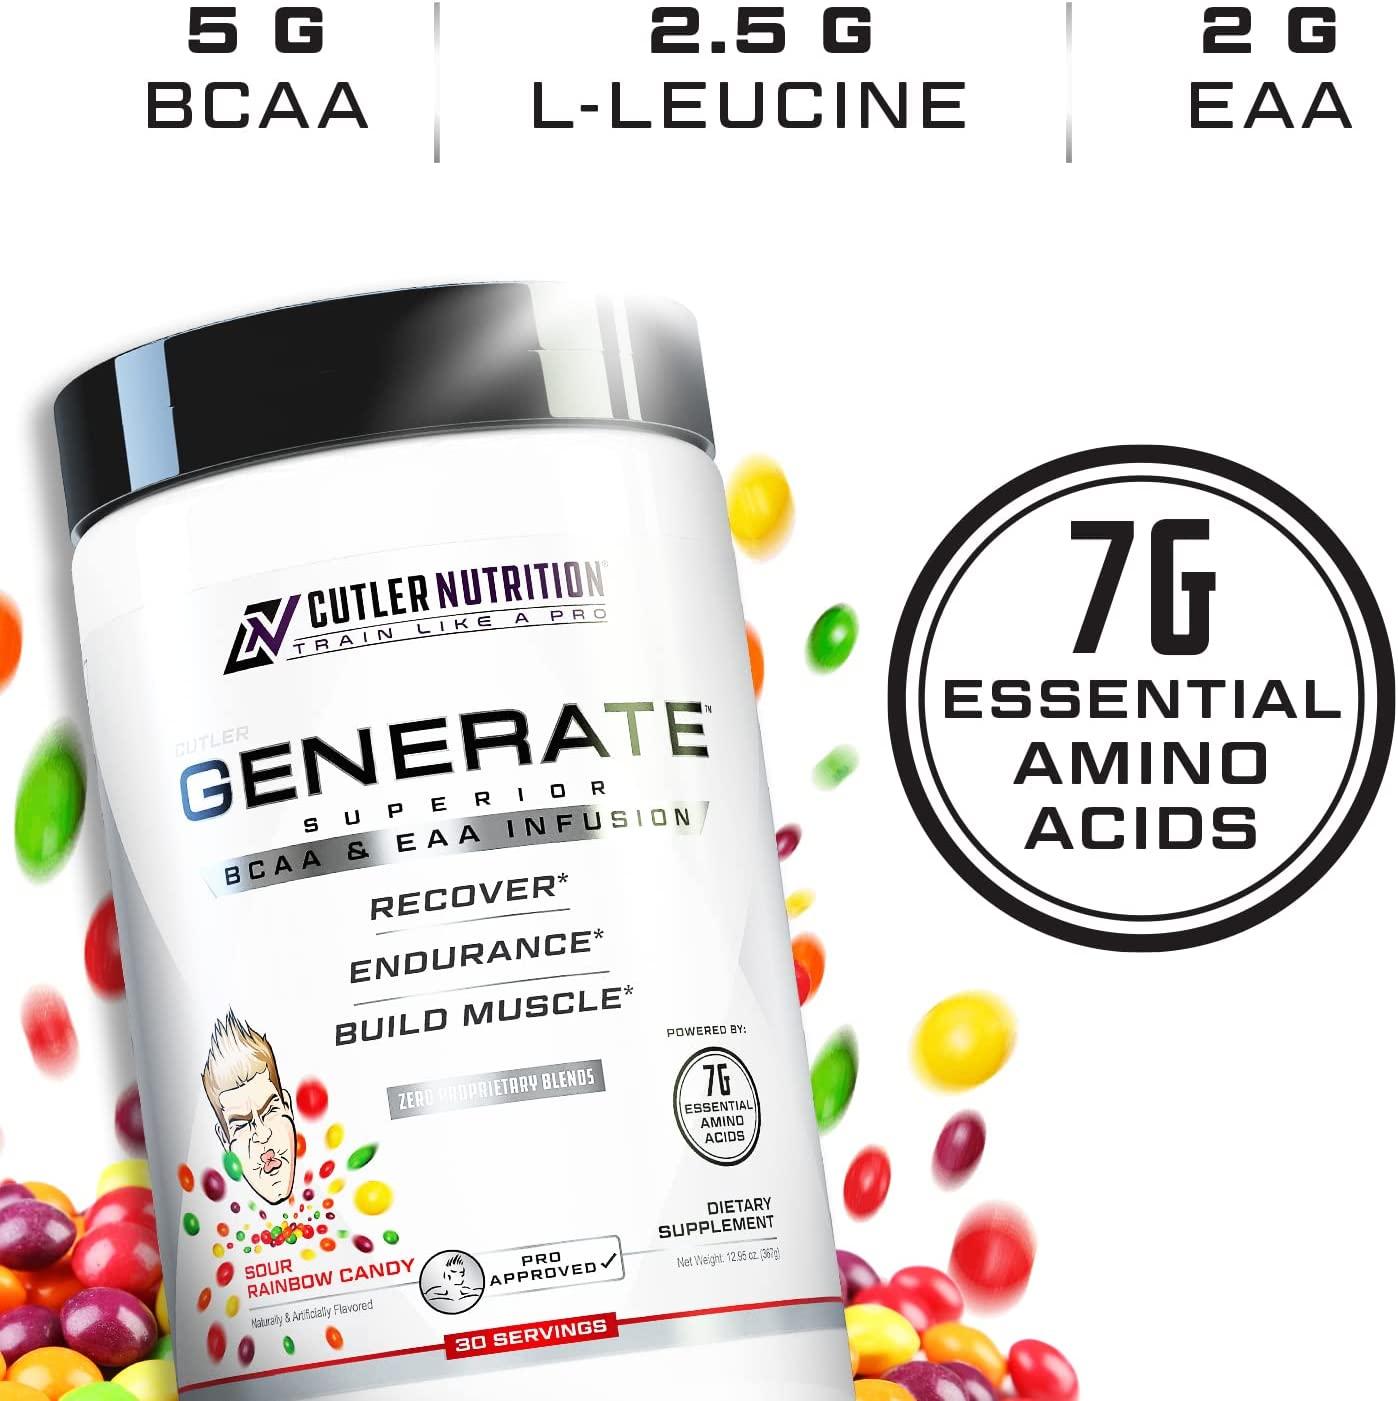 : Cutler Nutrition Generate EAA and BCAA Powder: Best Branched  Chain Amino Acids Supplement with Essential Amino Acids, 5g BCAAs, 2g EAAs  for Lean Muscle Mass